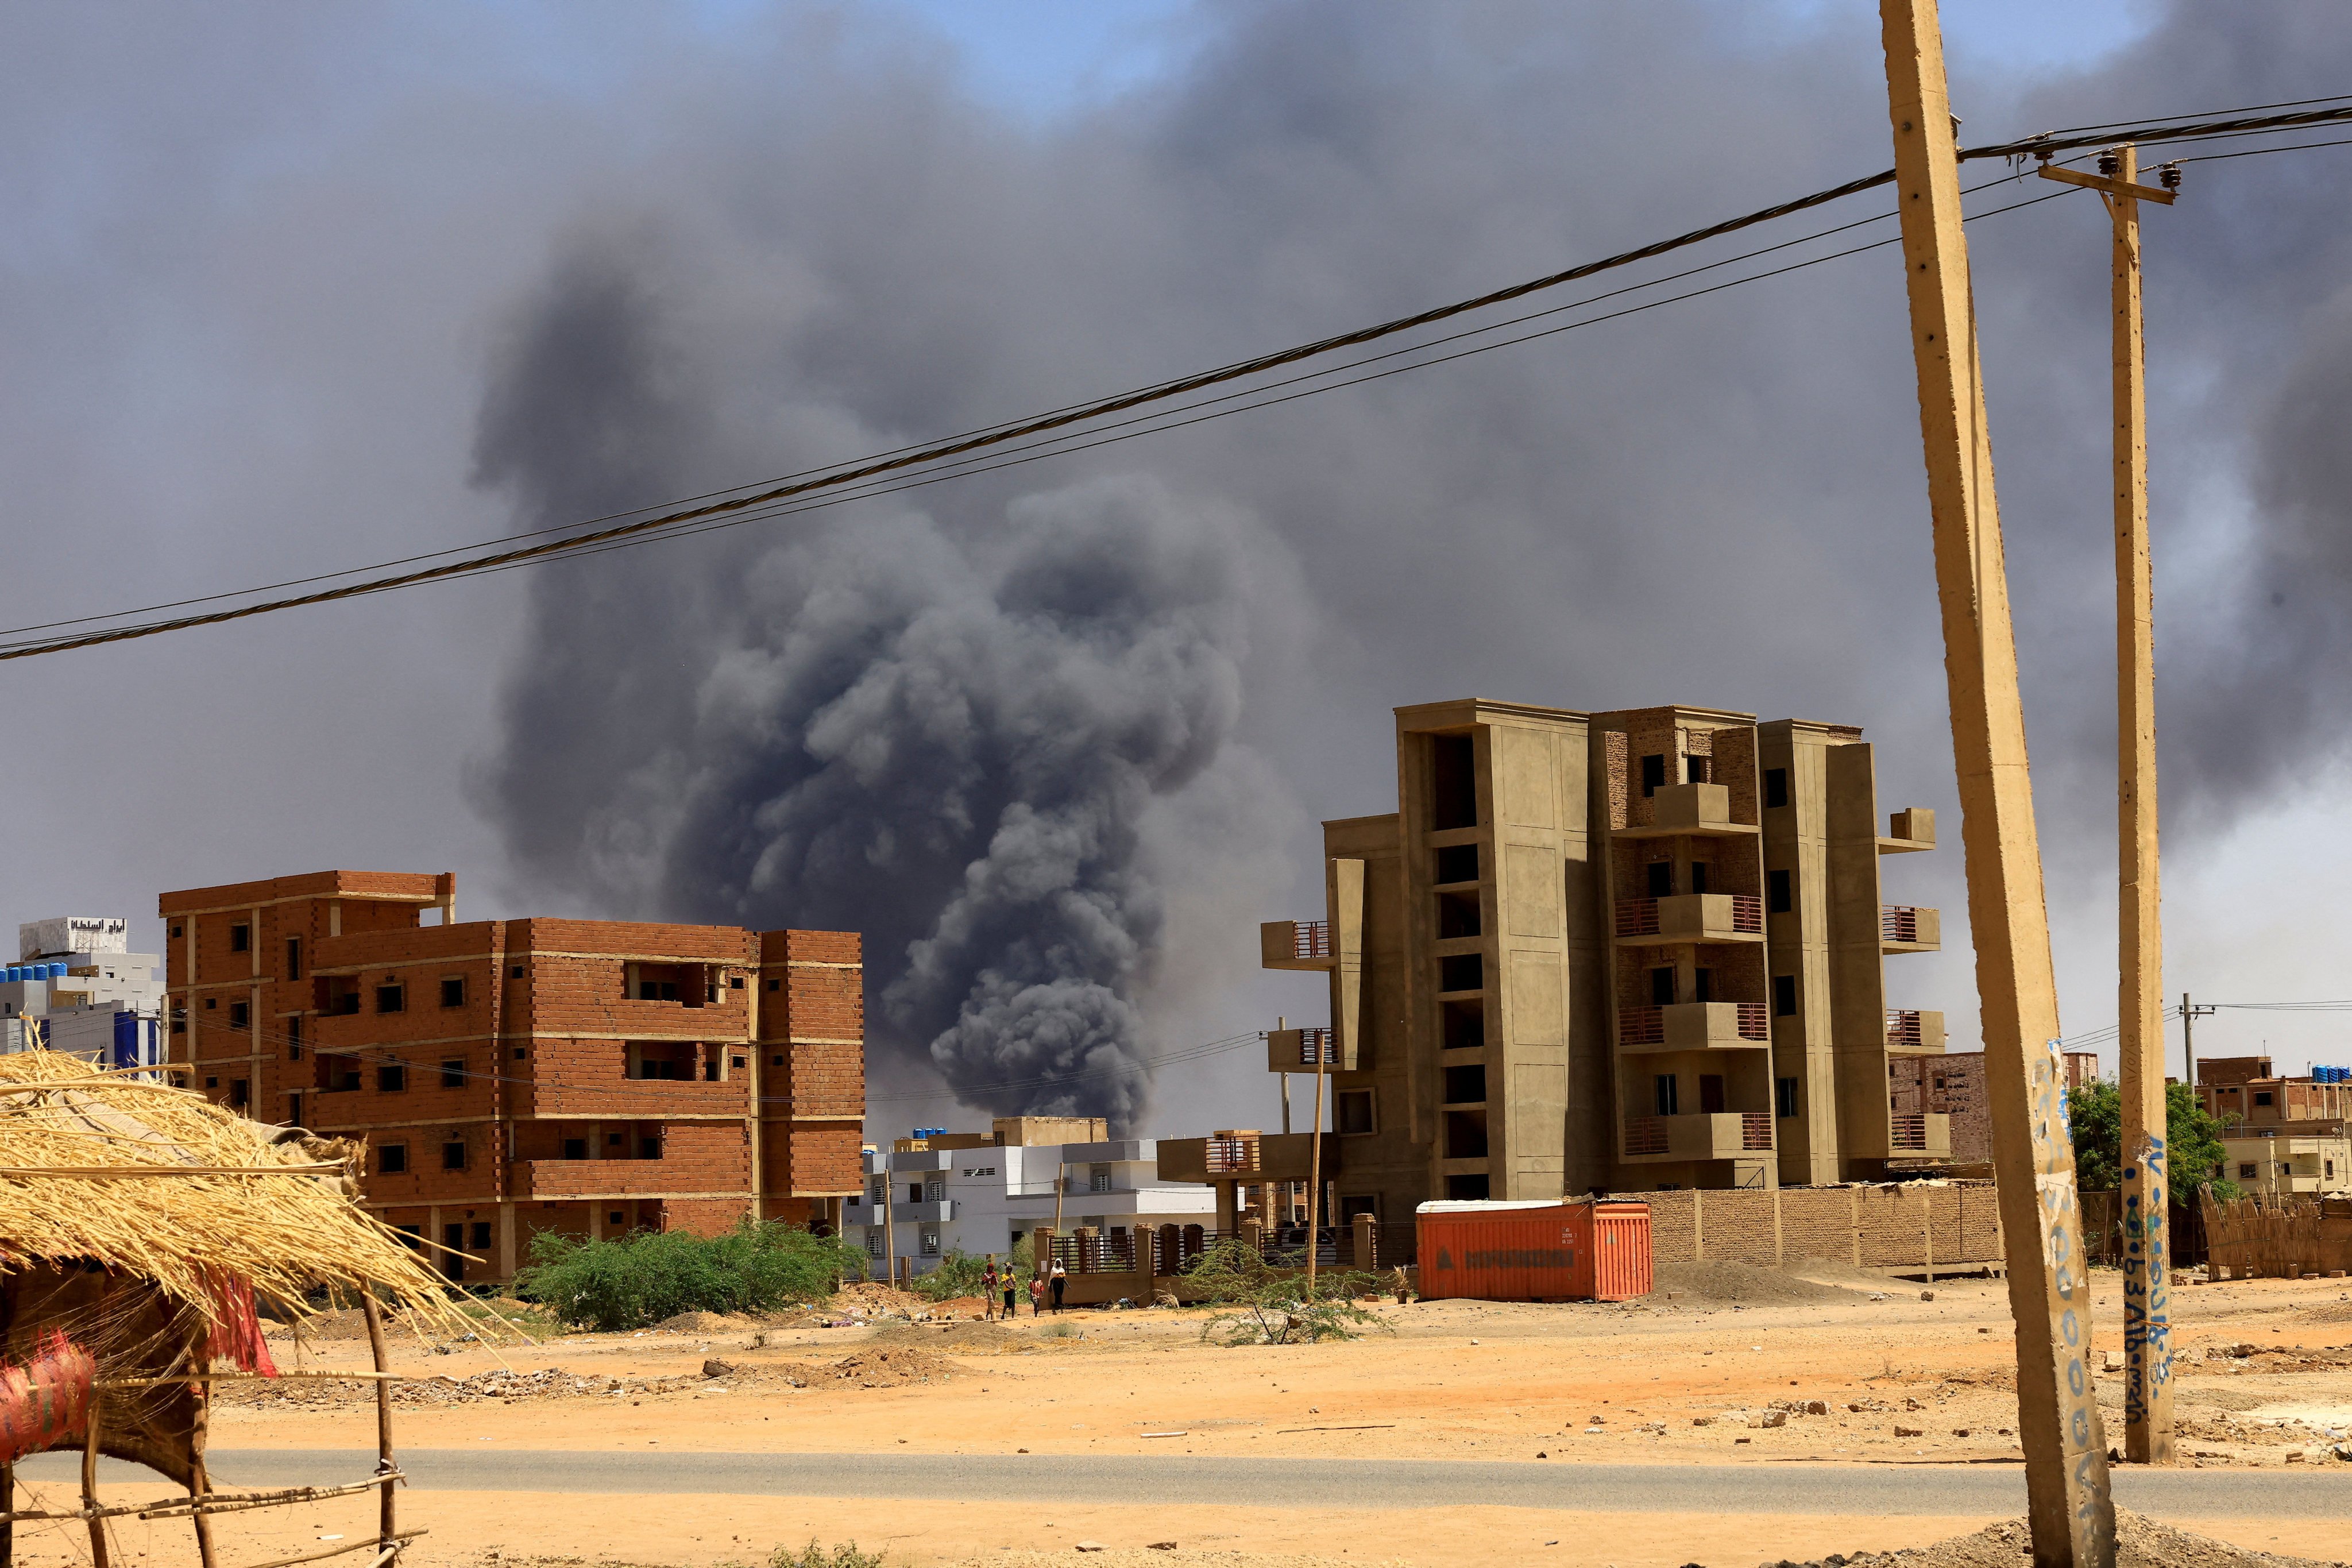 Smoke rises above buildings after an aerial bombardment in Khartoum, Sudan in May. On Sunday, air strikes killed at least 46 people and injured dozens at a Khartoum market. File photo: Reuters